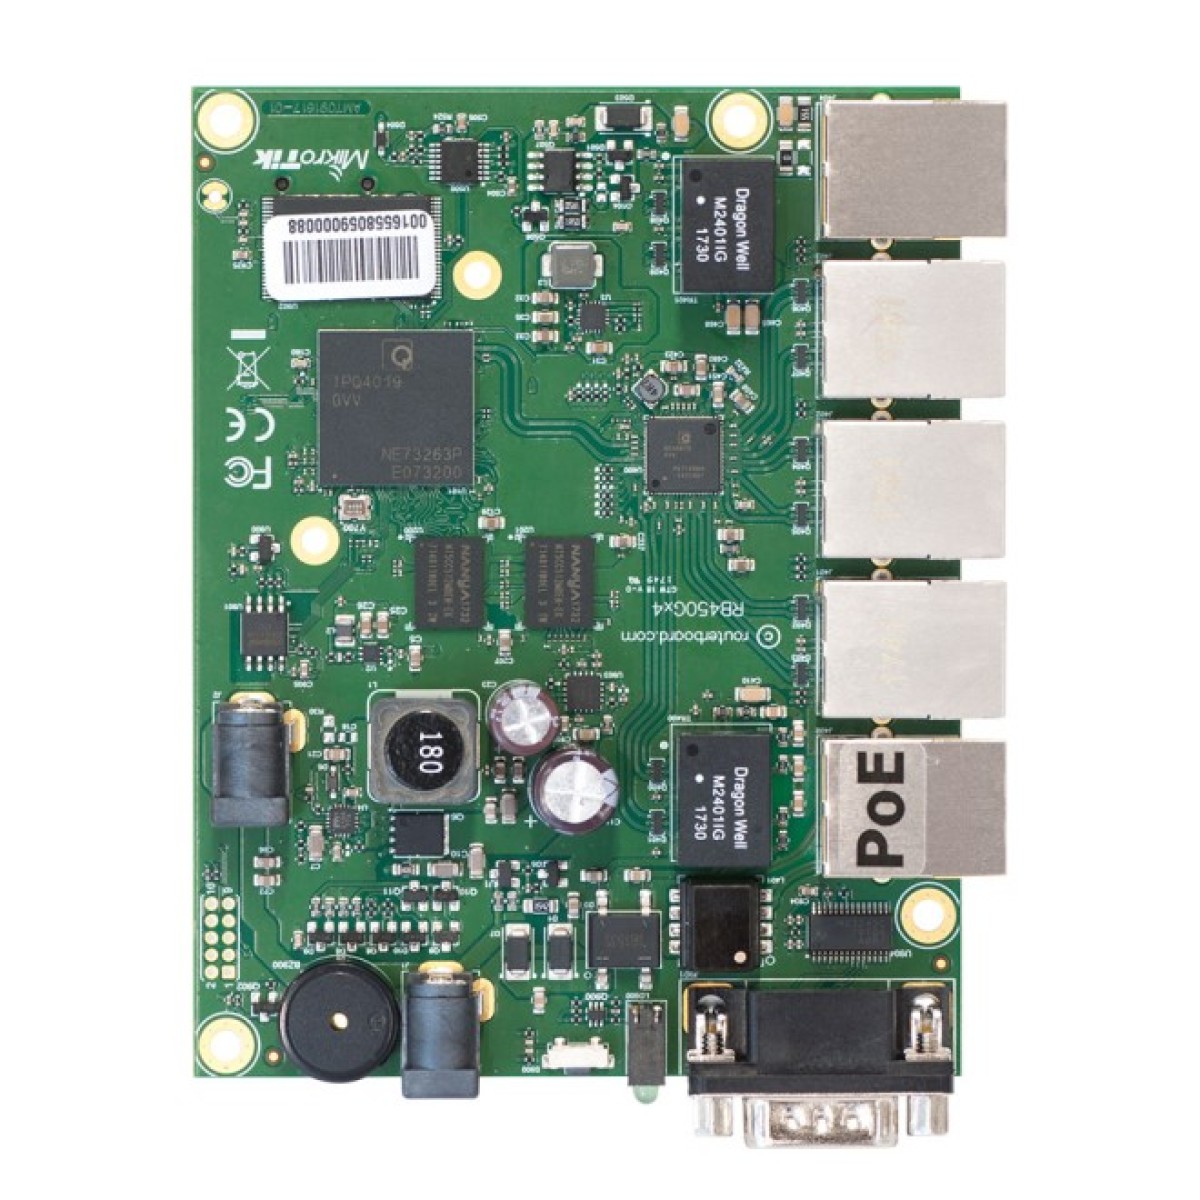 Маршрутизатор MikroTik RouterBOARD (RB450Gx4) 256_256.jpg